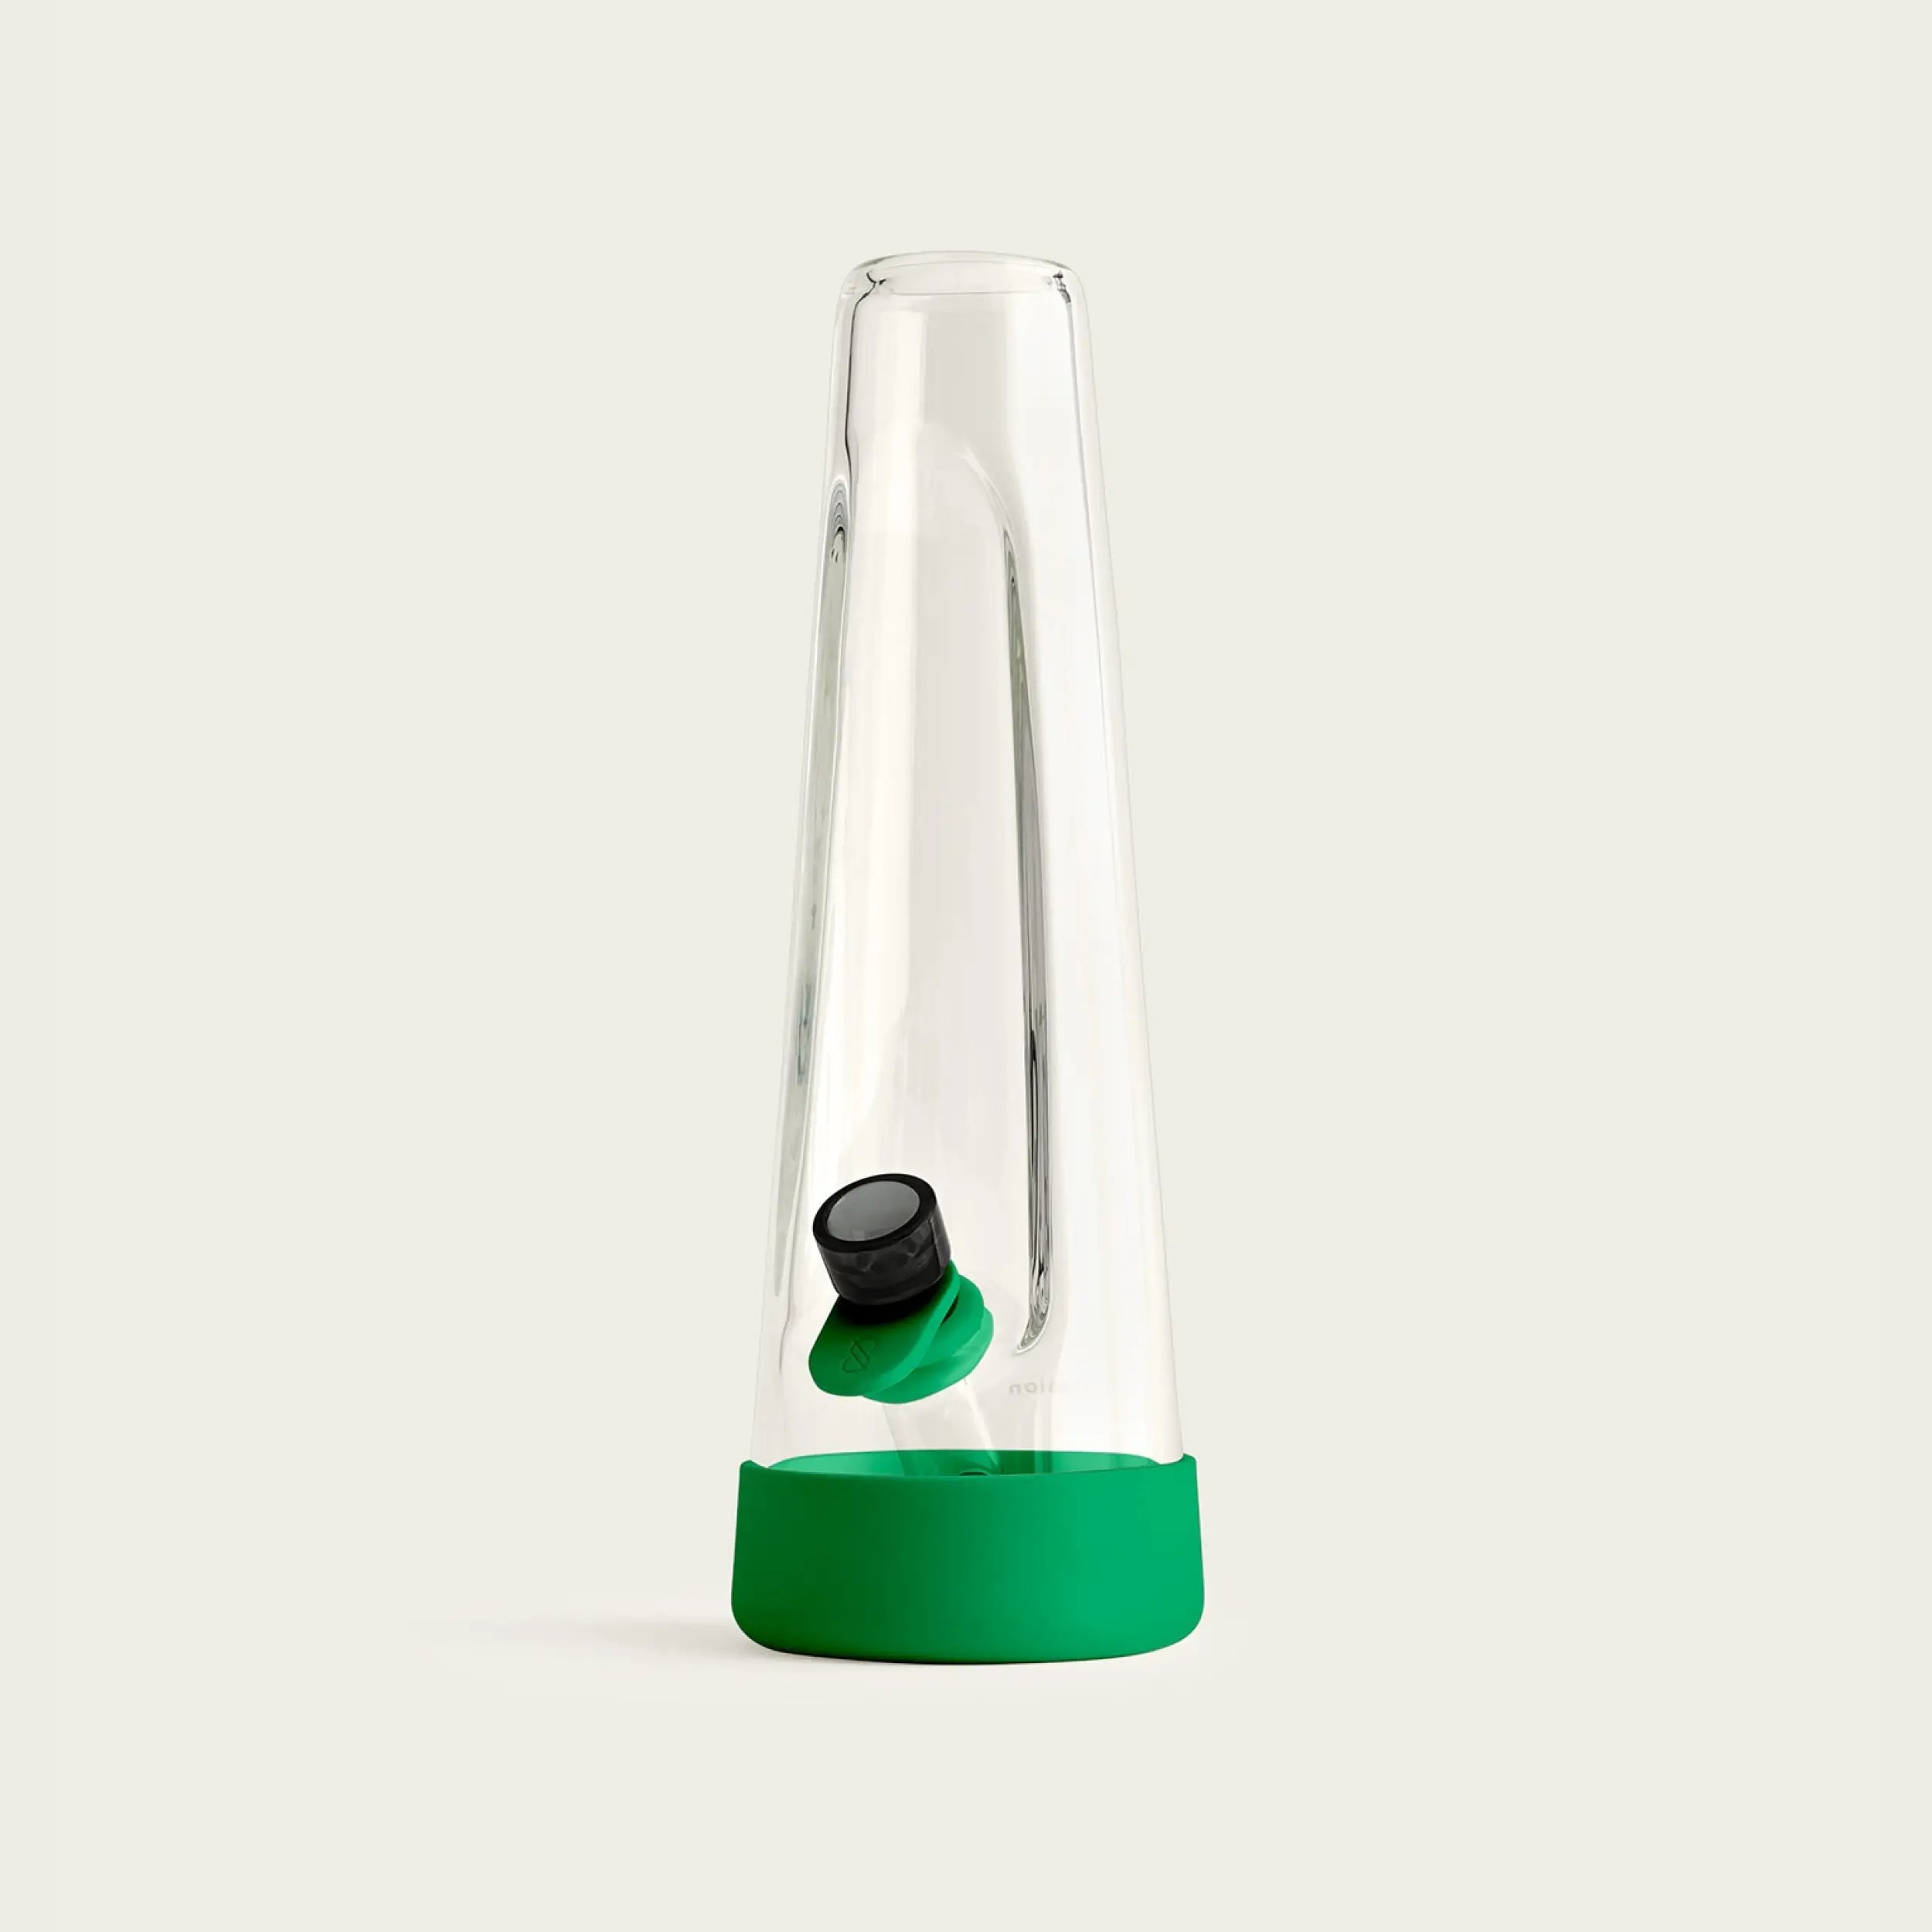 The session bong is sleek and easy to clean.